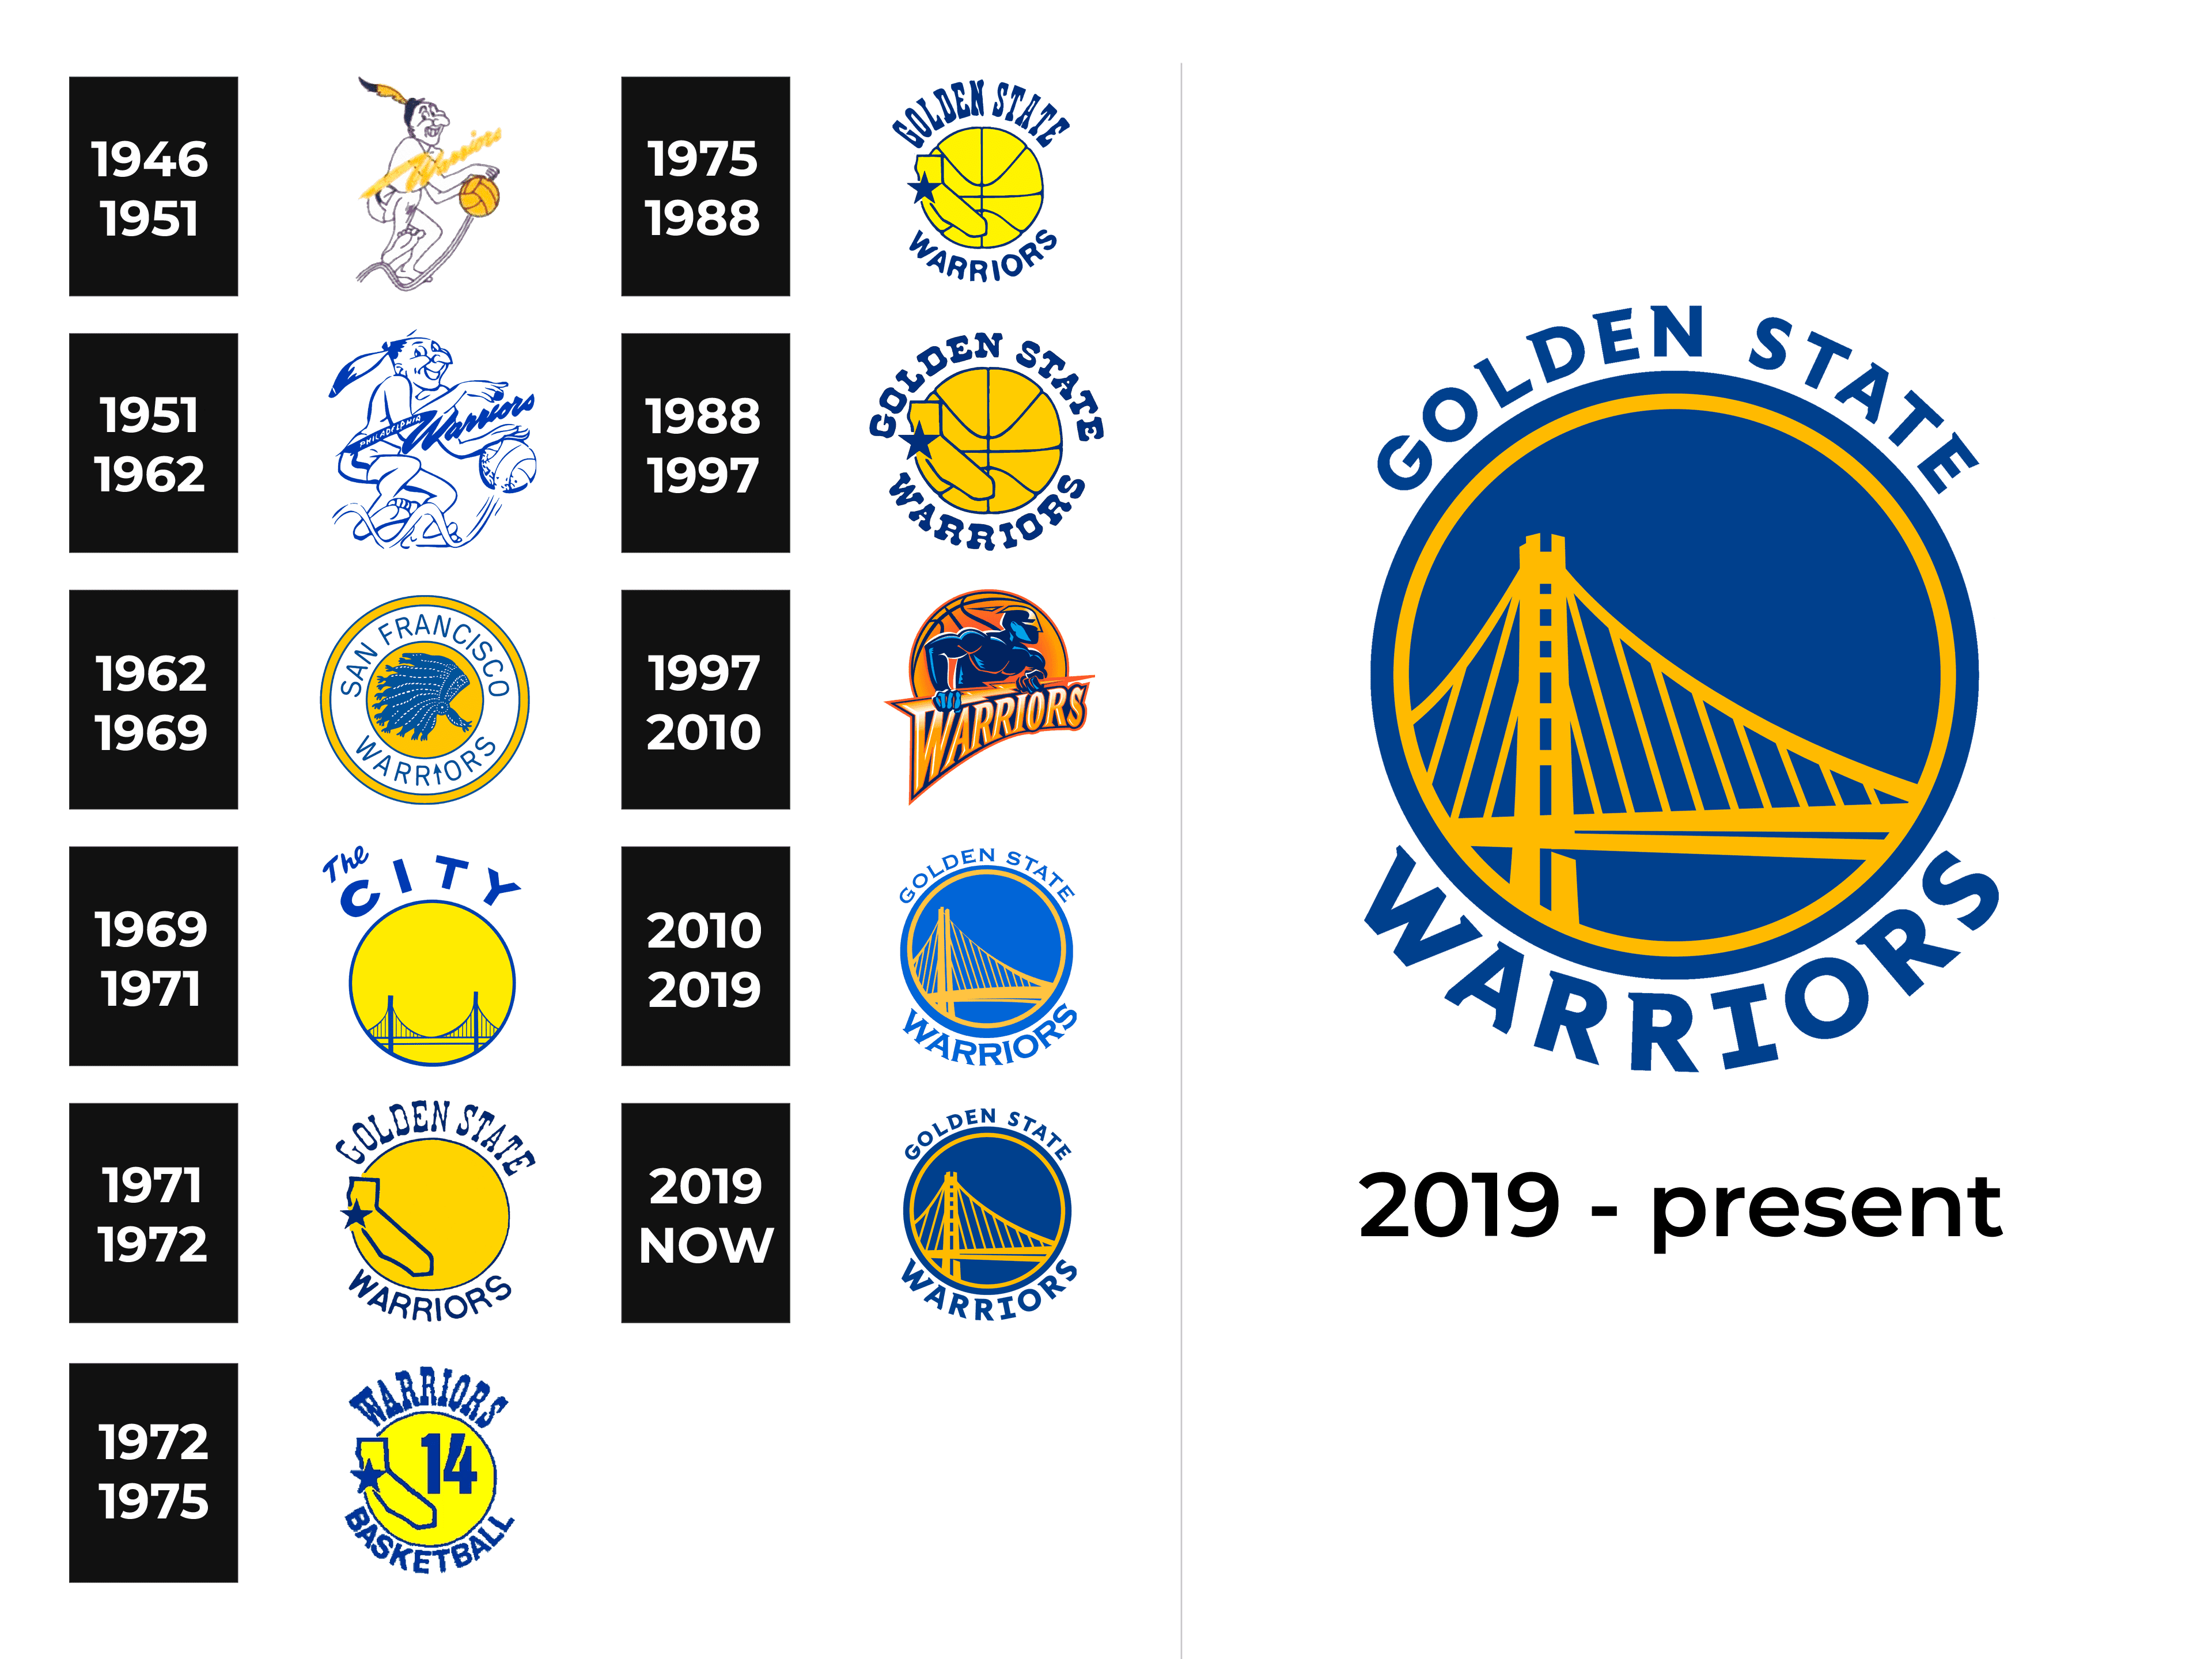 Golden State Warriors Logo and symbol, meaning, history, PNG, brand